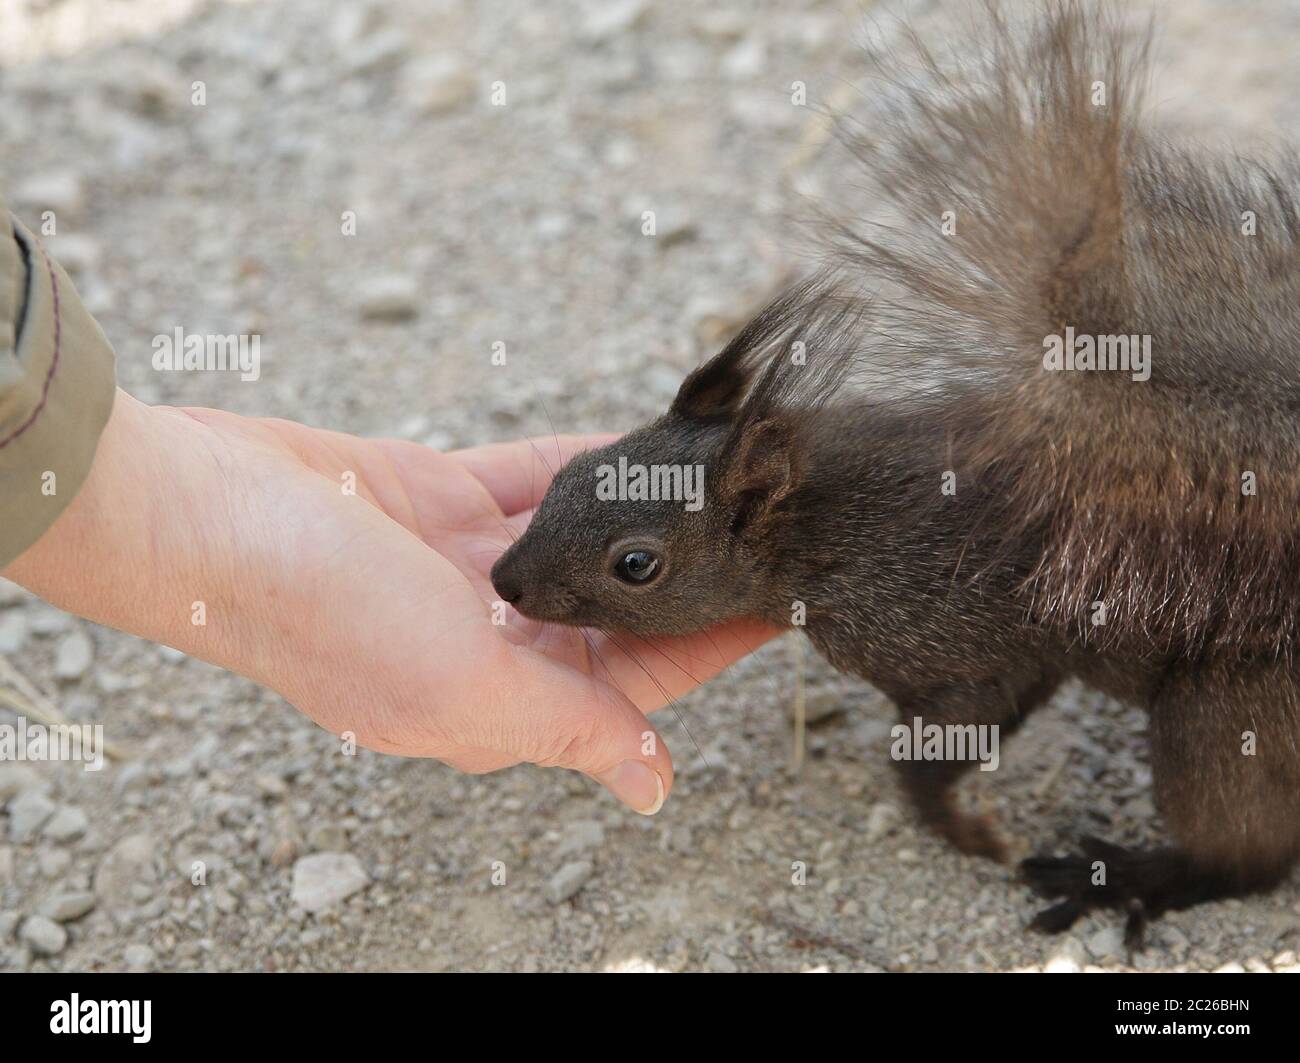 Woman feeding a squirrel with her hand. Stock Photo